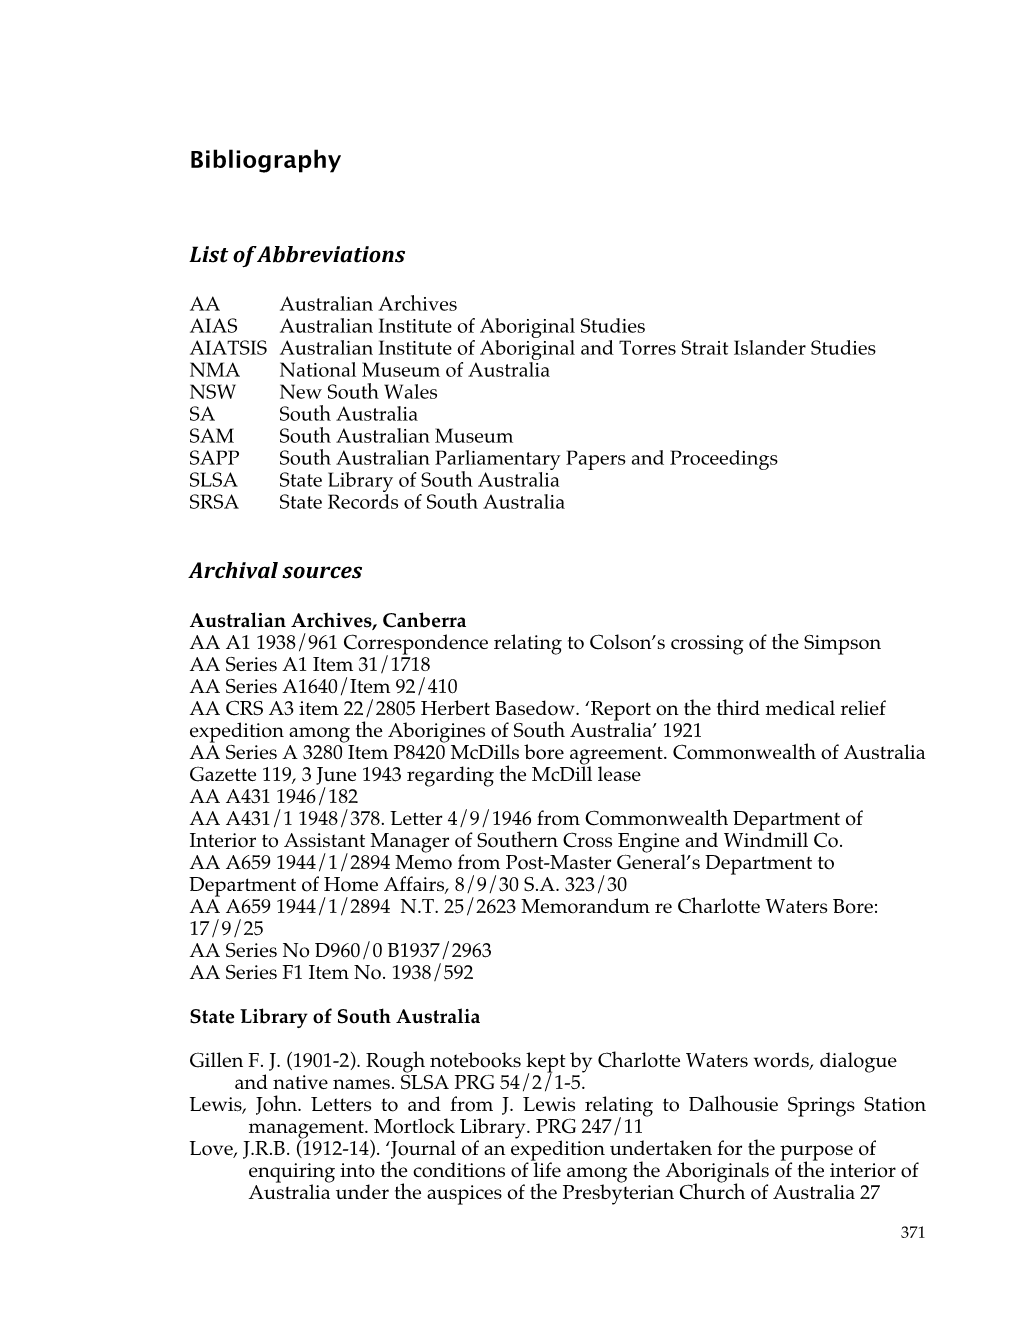 Bibliography List of Abbreviations Archival Sources